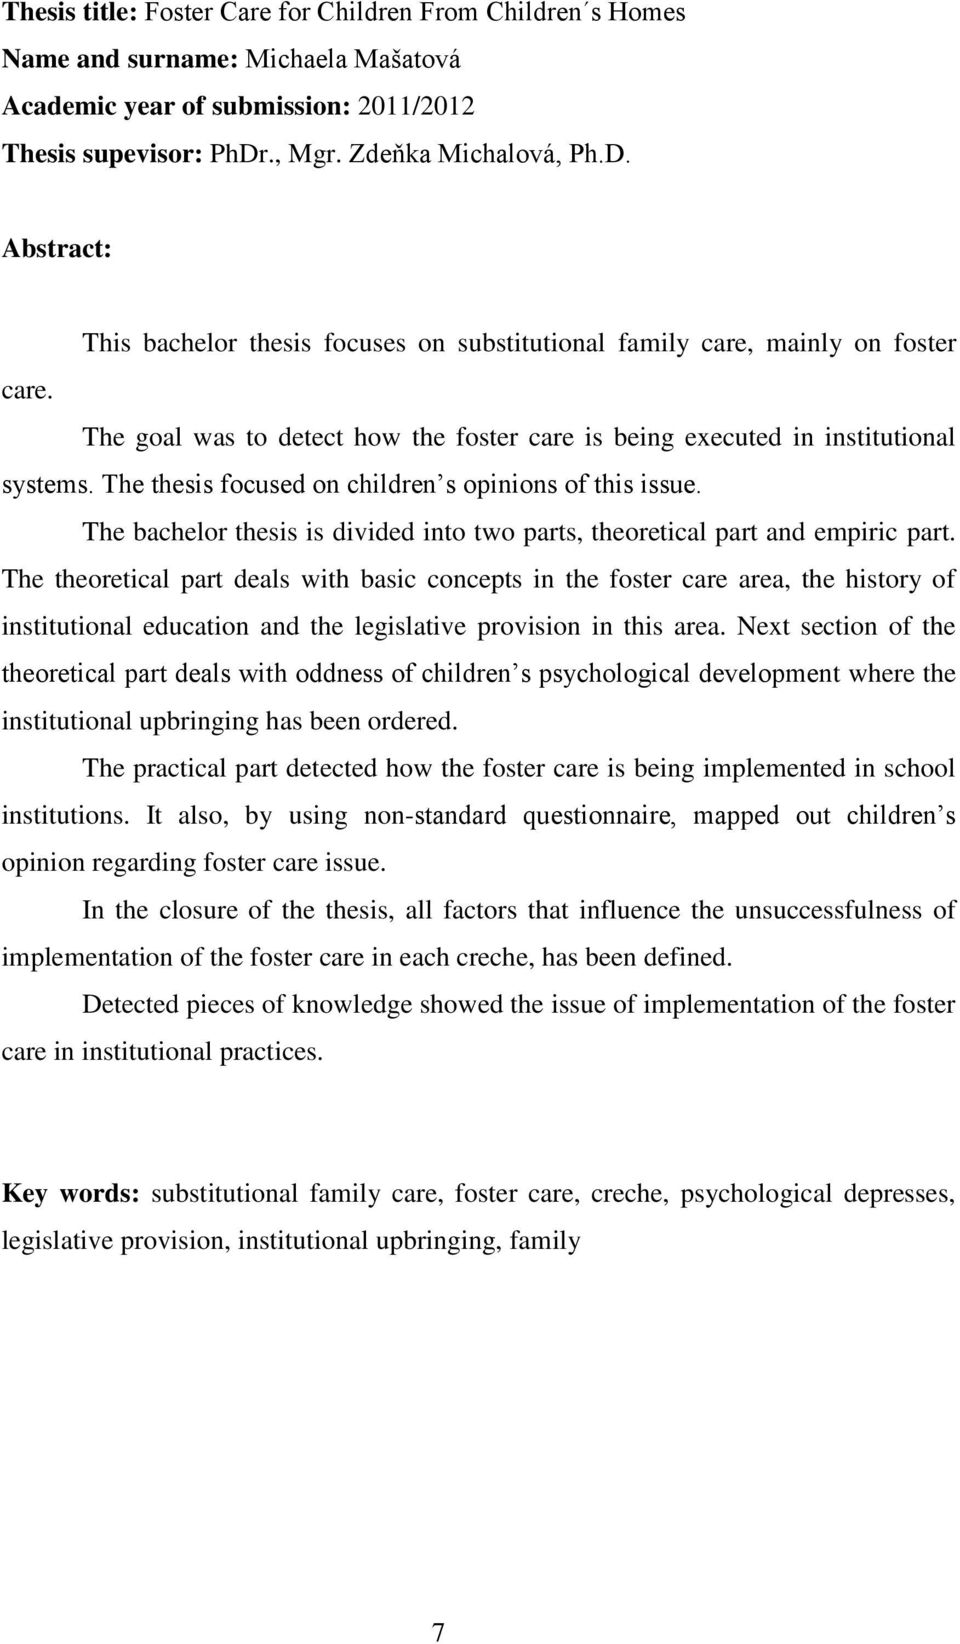 The goal was to detect how the foster care is being executed in institutional systems. The thesis focused on children s opinions of this issue.